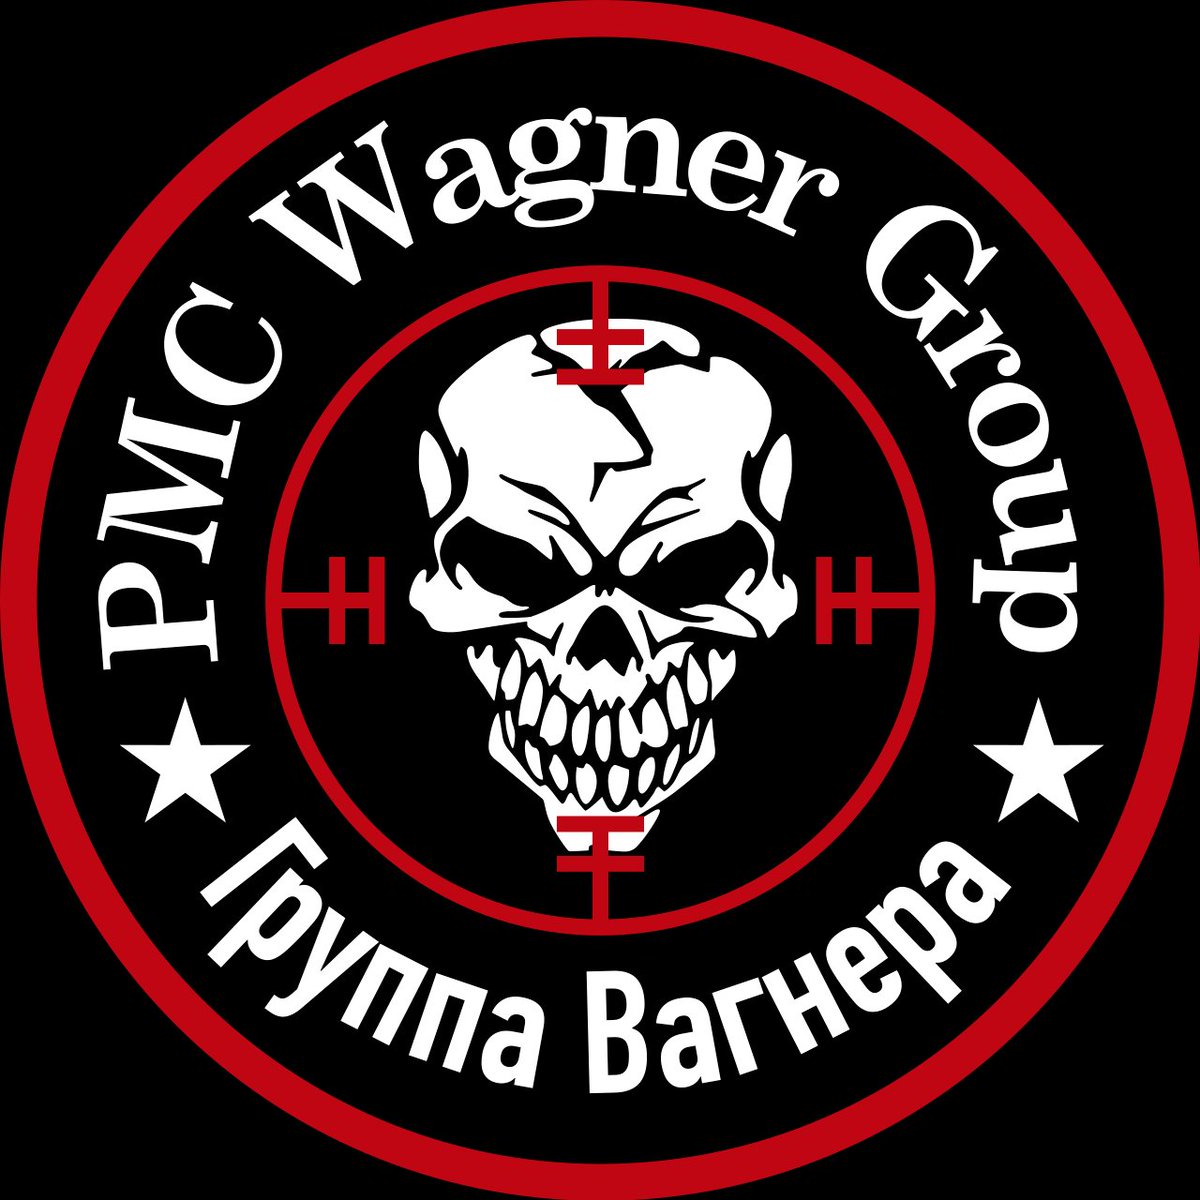 In today's #vatnik soup I'll introduce Yevgeny Prigozhin's Wagner Group. I have written about the topic before, but now that it's been designated as a Transnational Criminal Organization by the US, we should reiterate some key points and update the latest news about them.

1/16